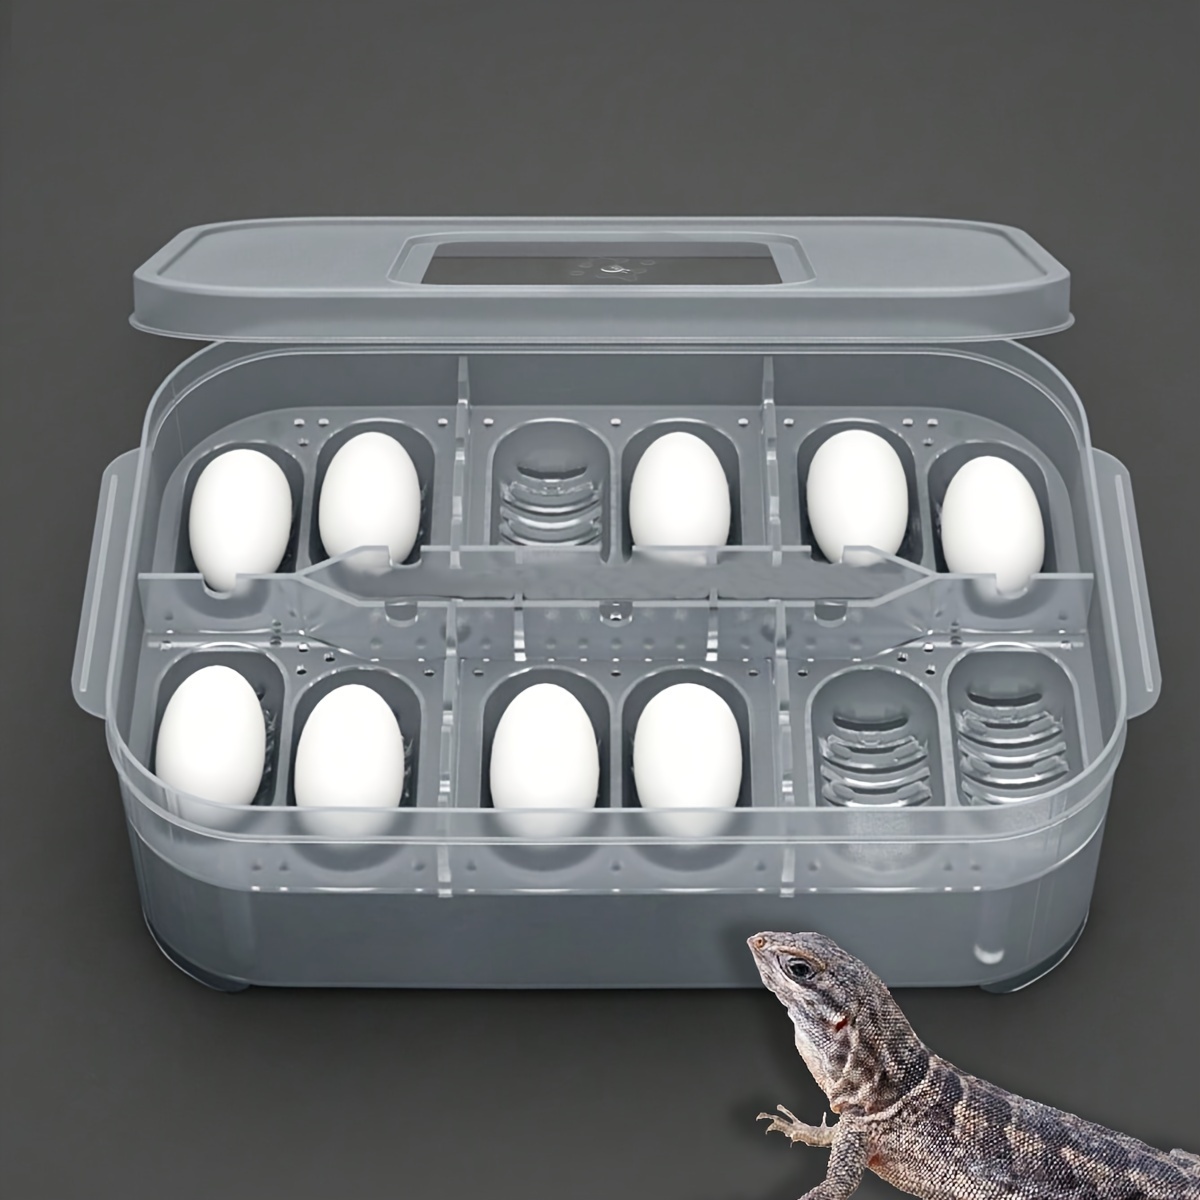 

1pc Reptile Pet House White Hatching Box For Snake Lizard Hatcher Egg Tray Reptile Breeding Container